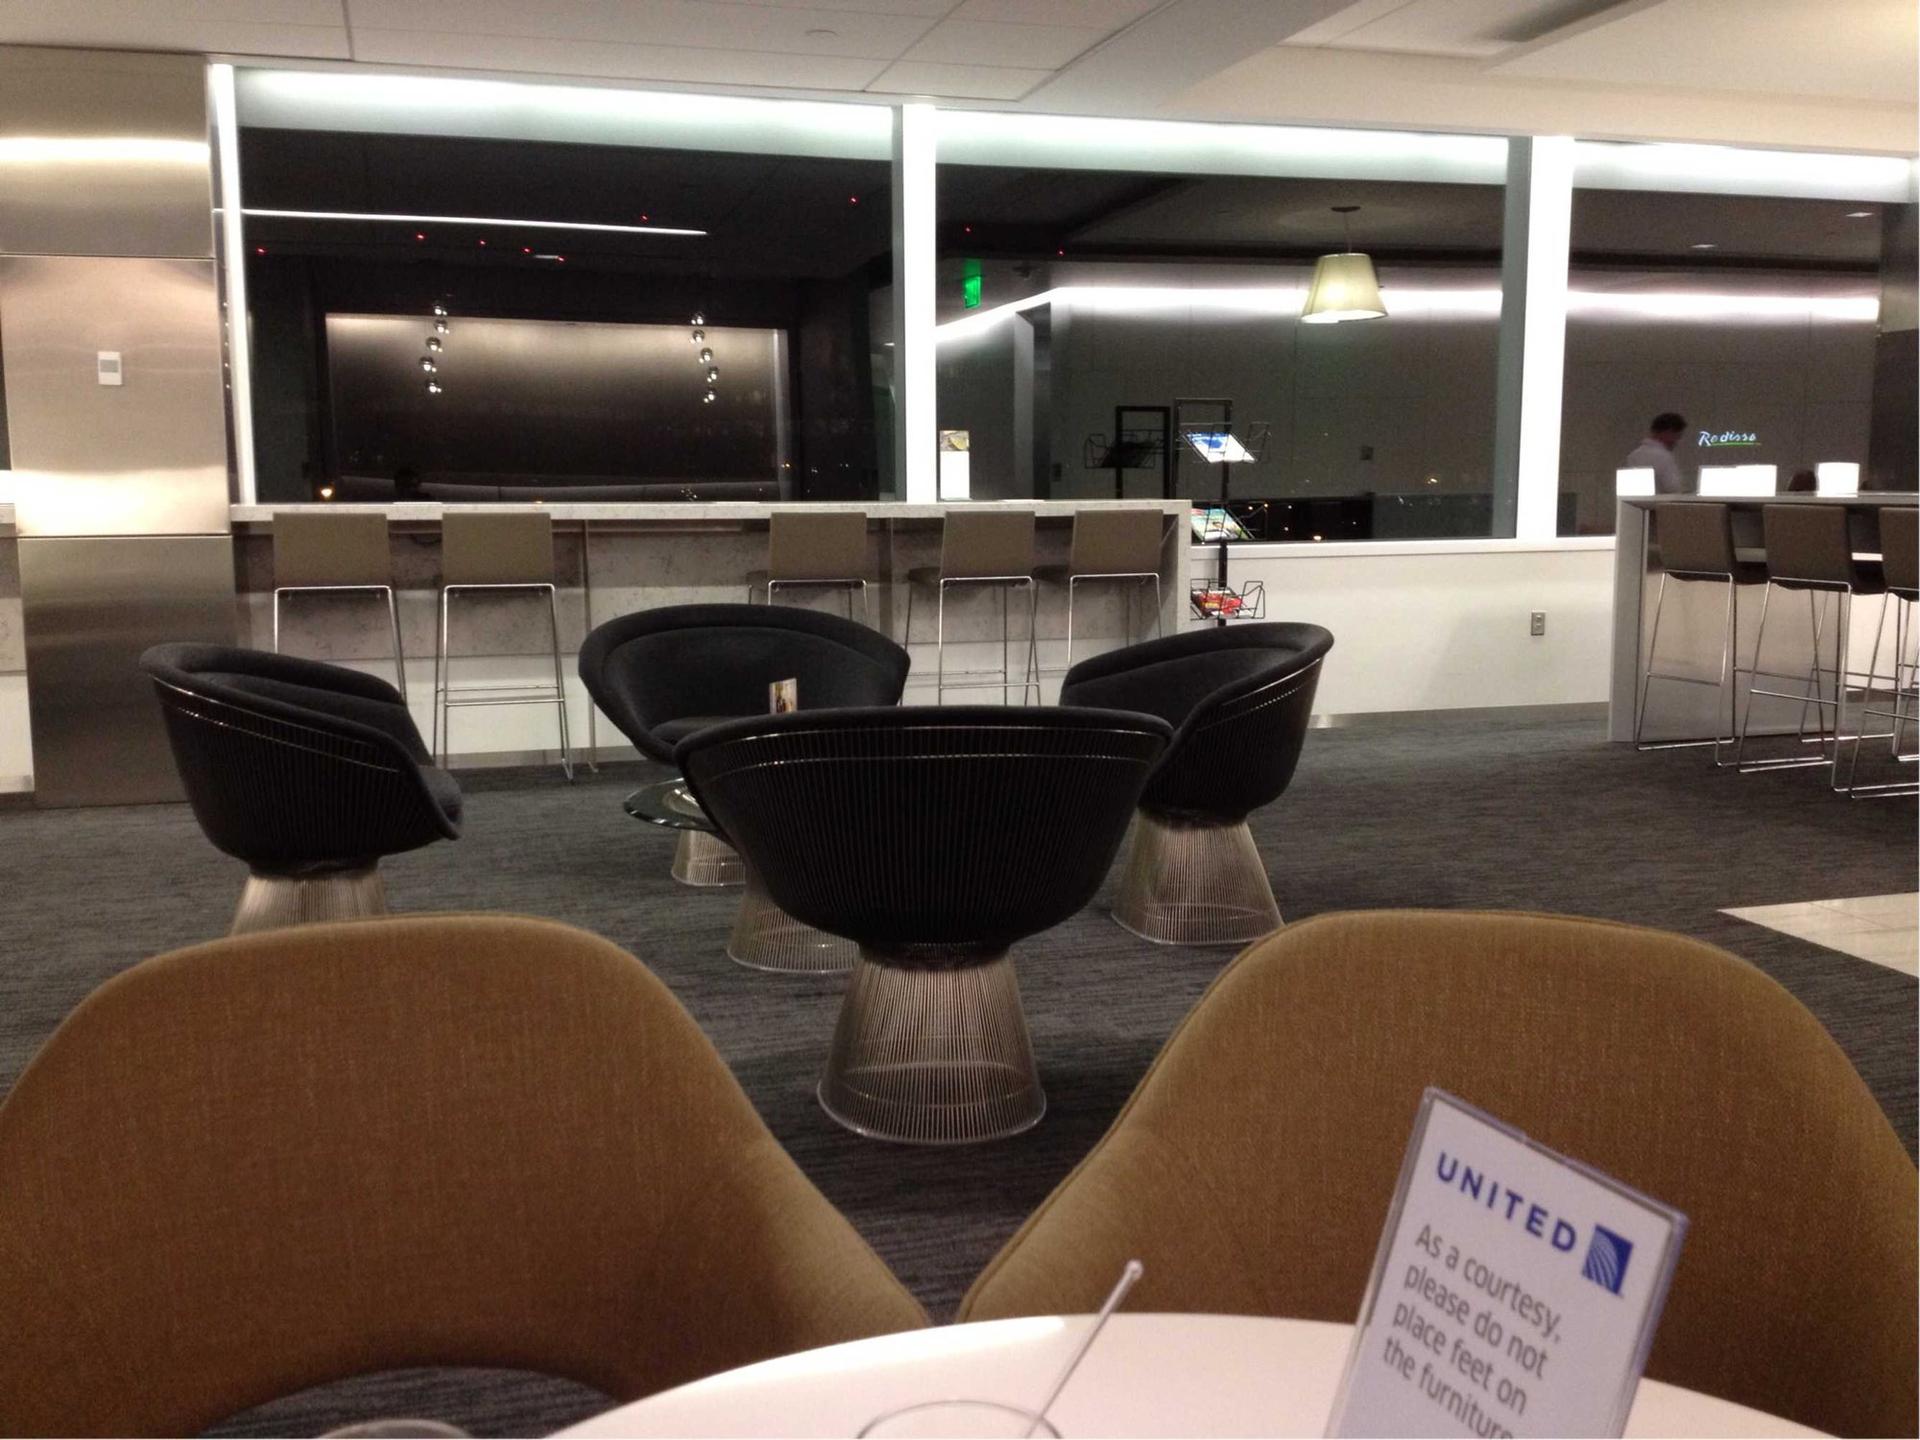 United Airlines United Club image 3 of 57